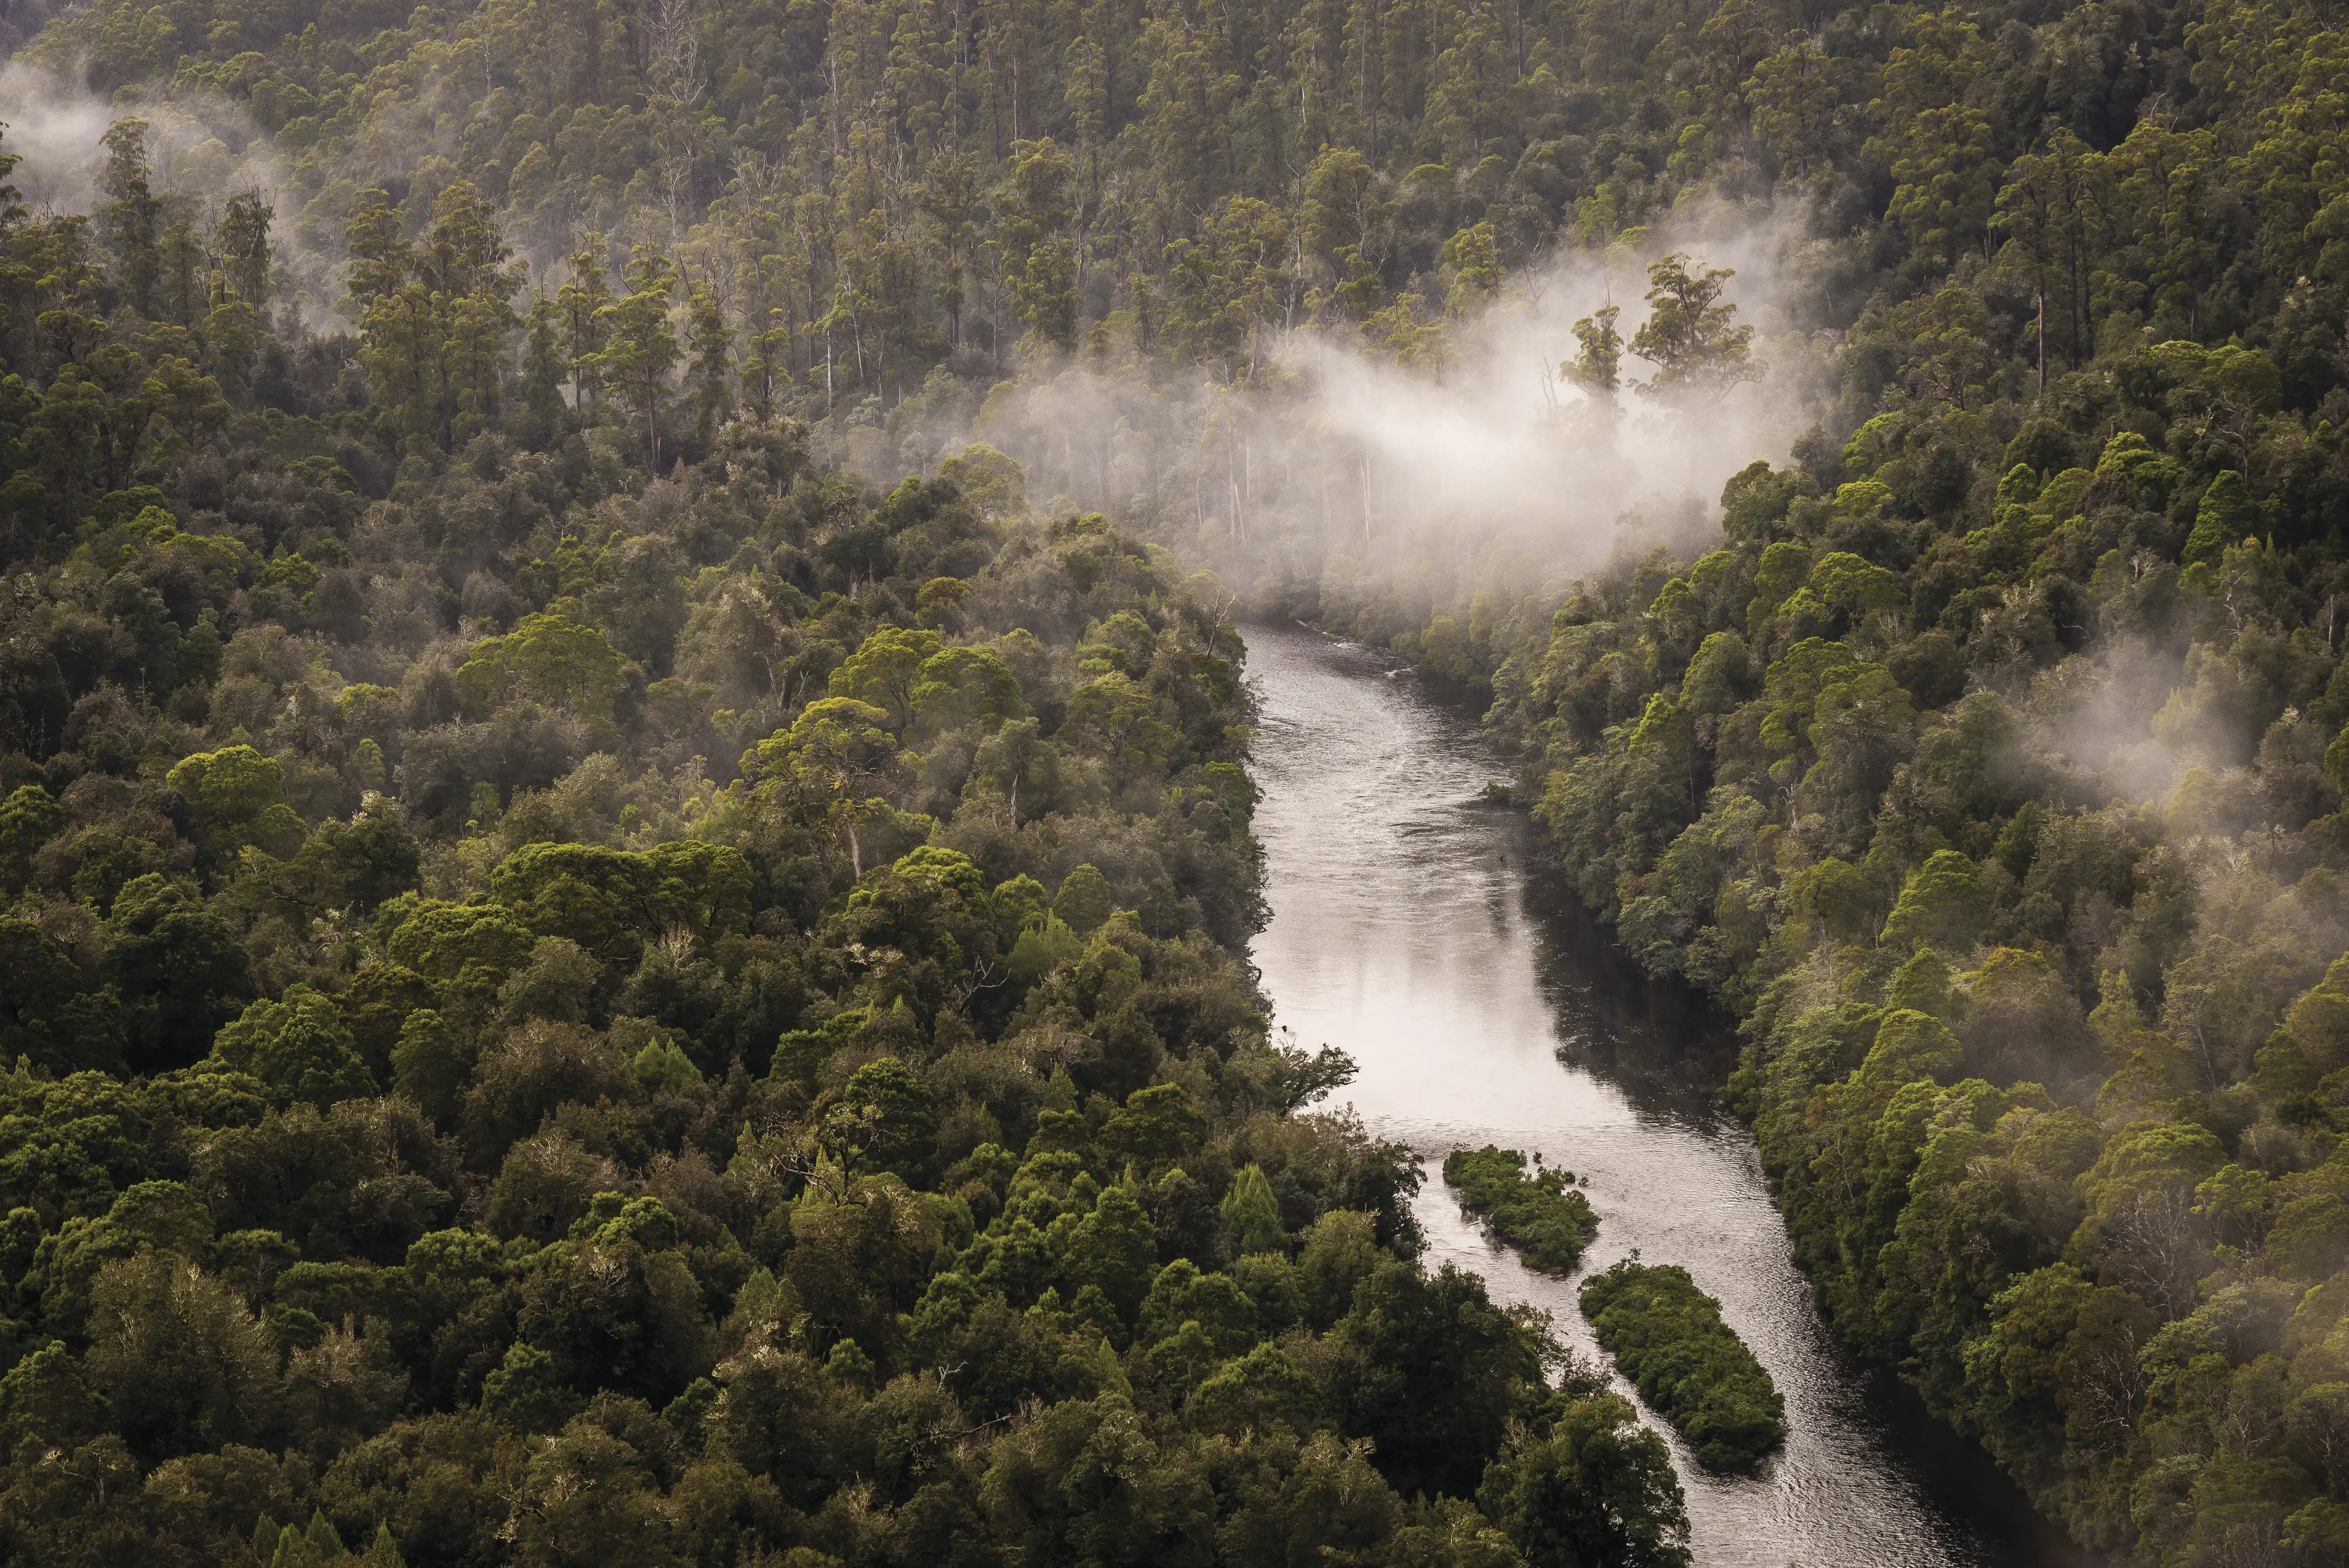 View of the Arthur River from Sumac Lookout, takayna / Tarkine. Mist flows through the trees that surround the river.